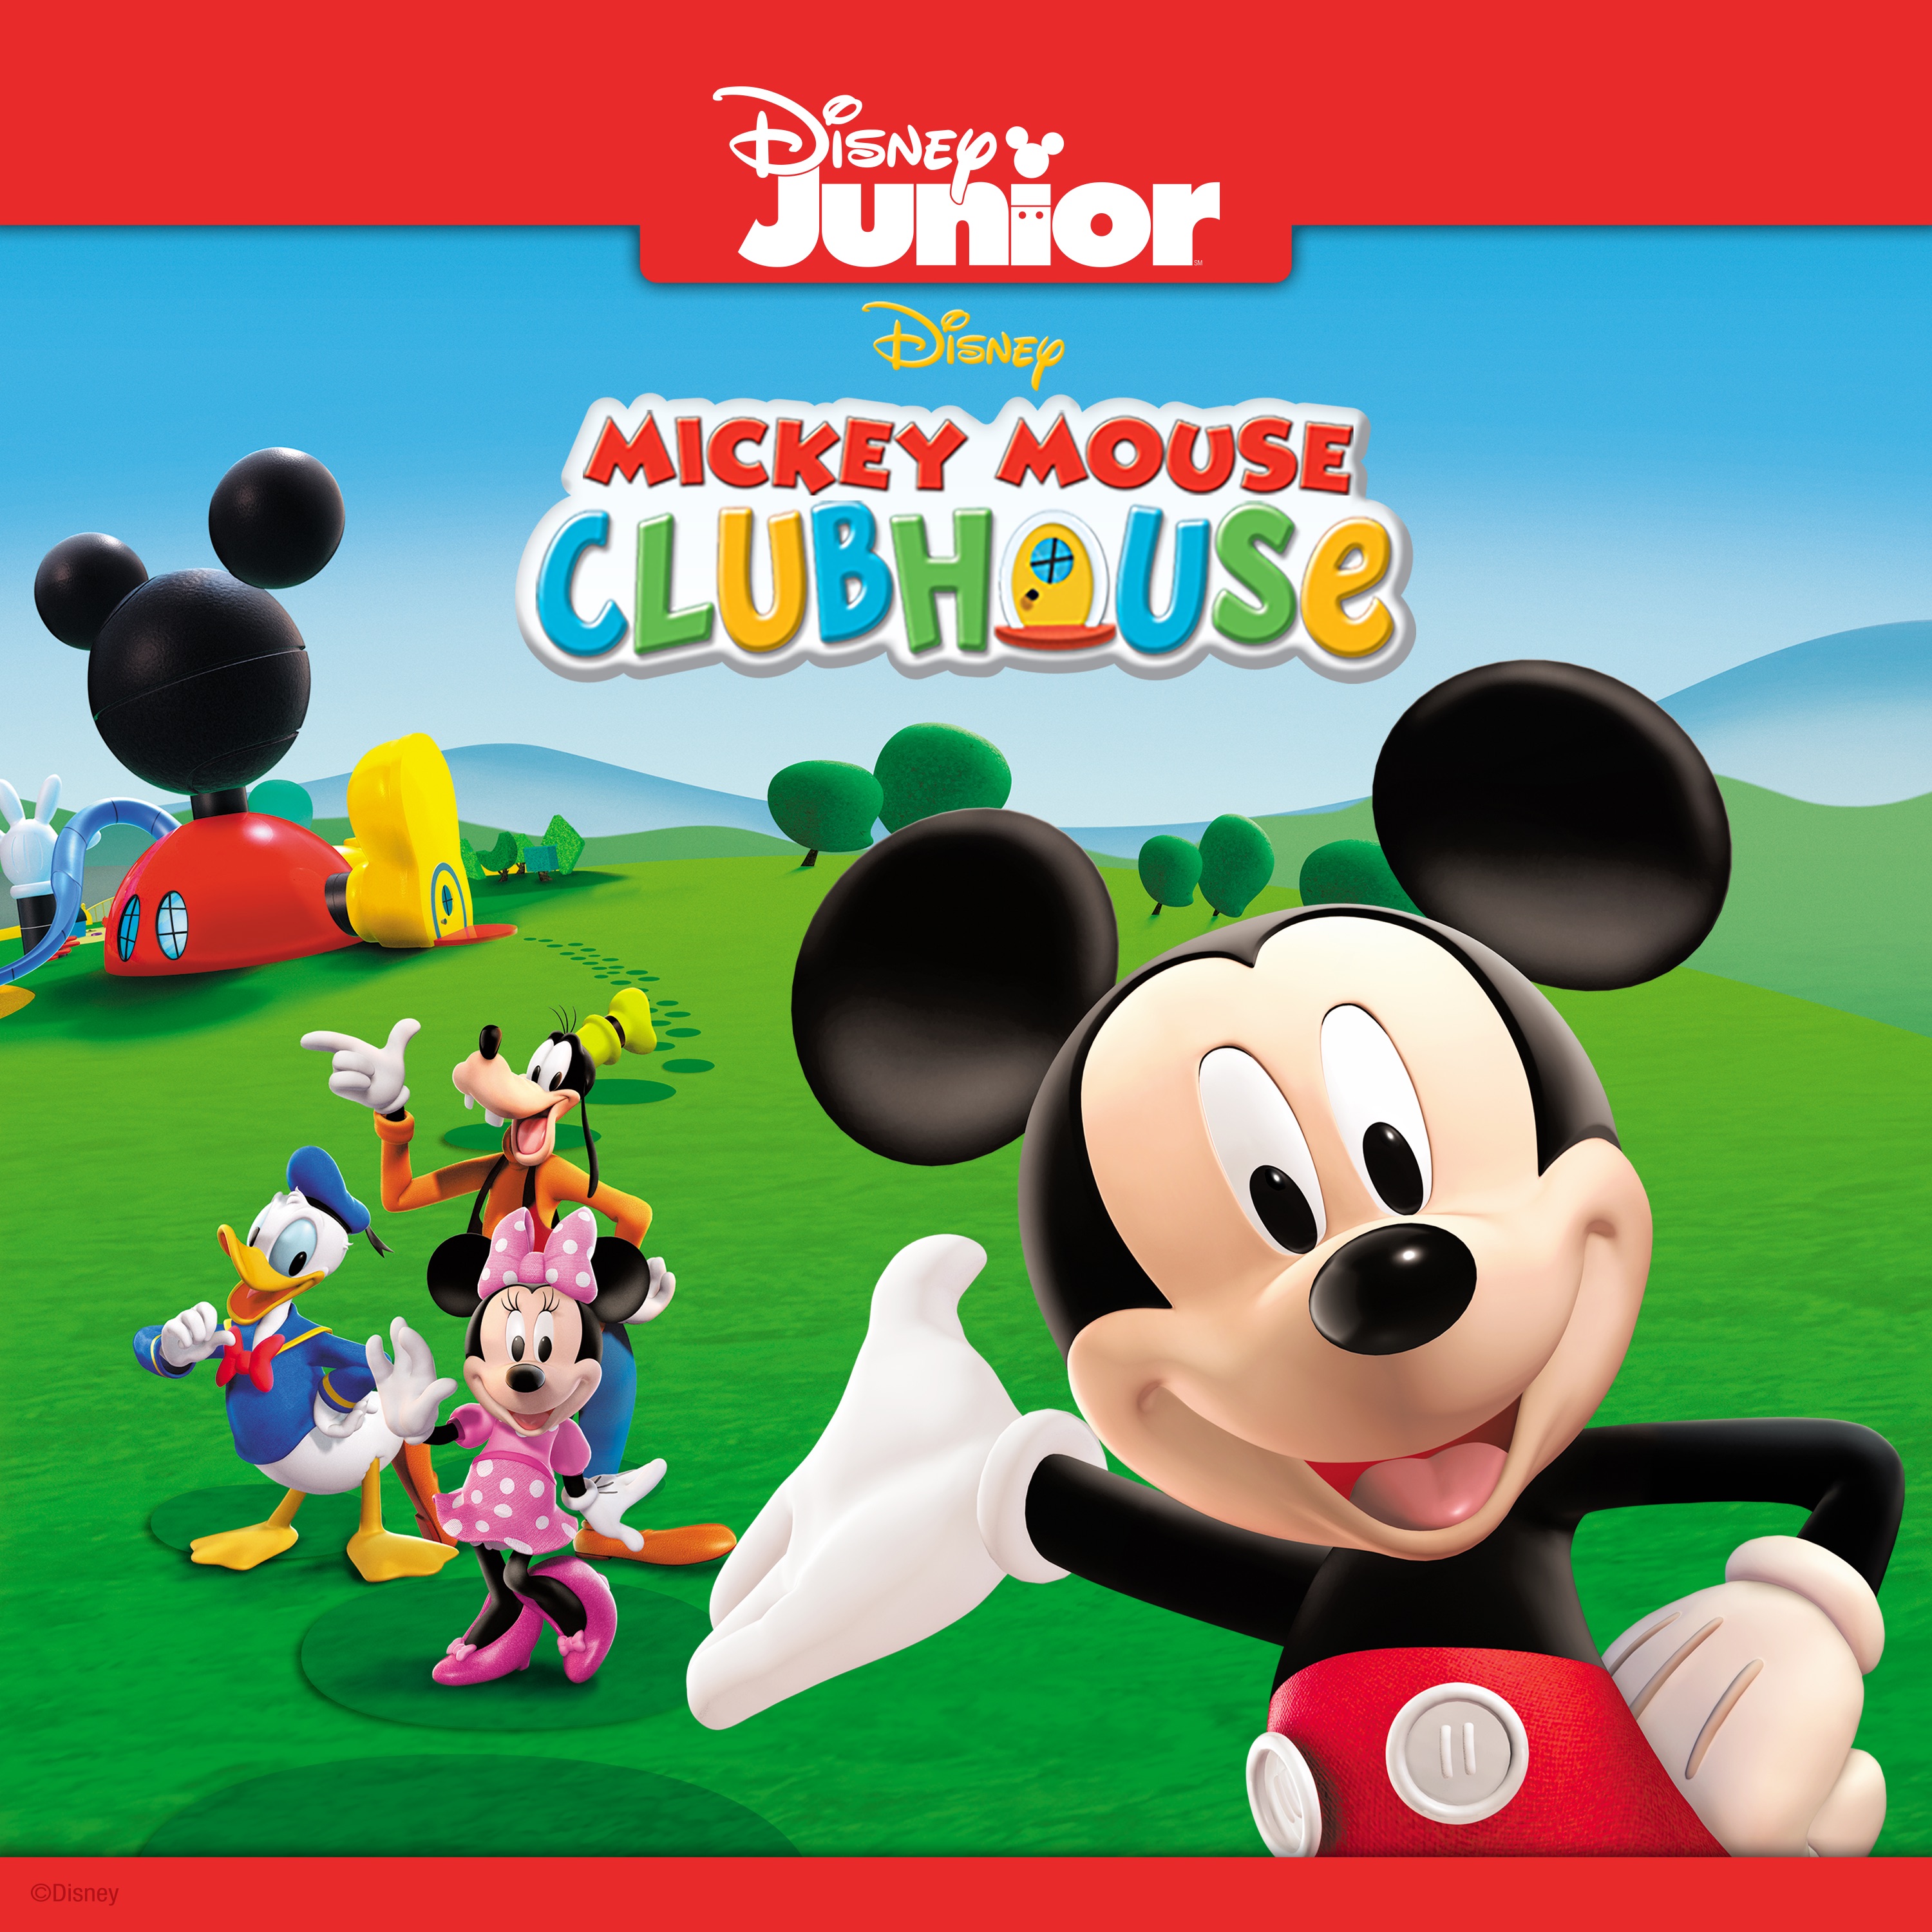 Mickey mouse clubhouse season 4 tv